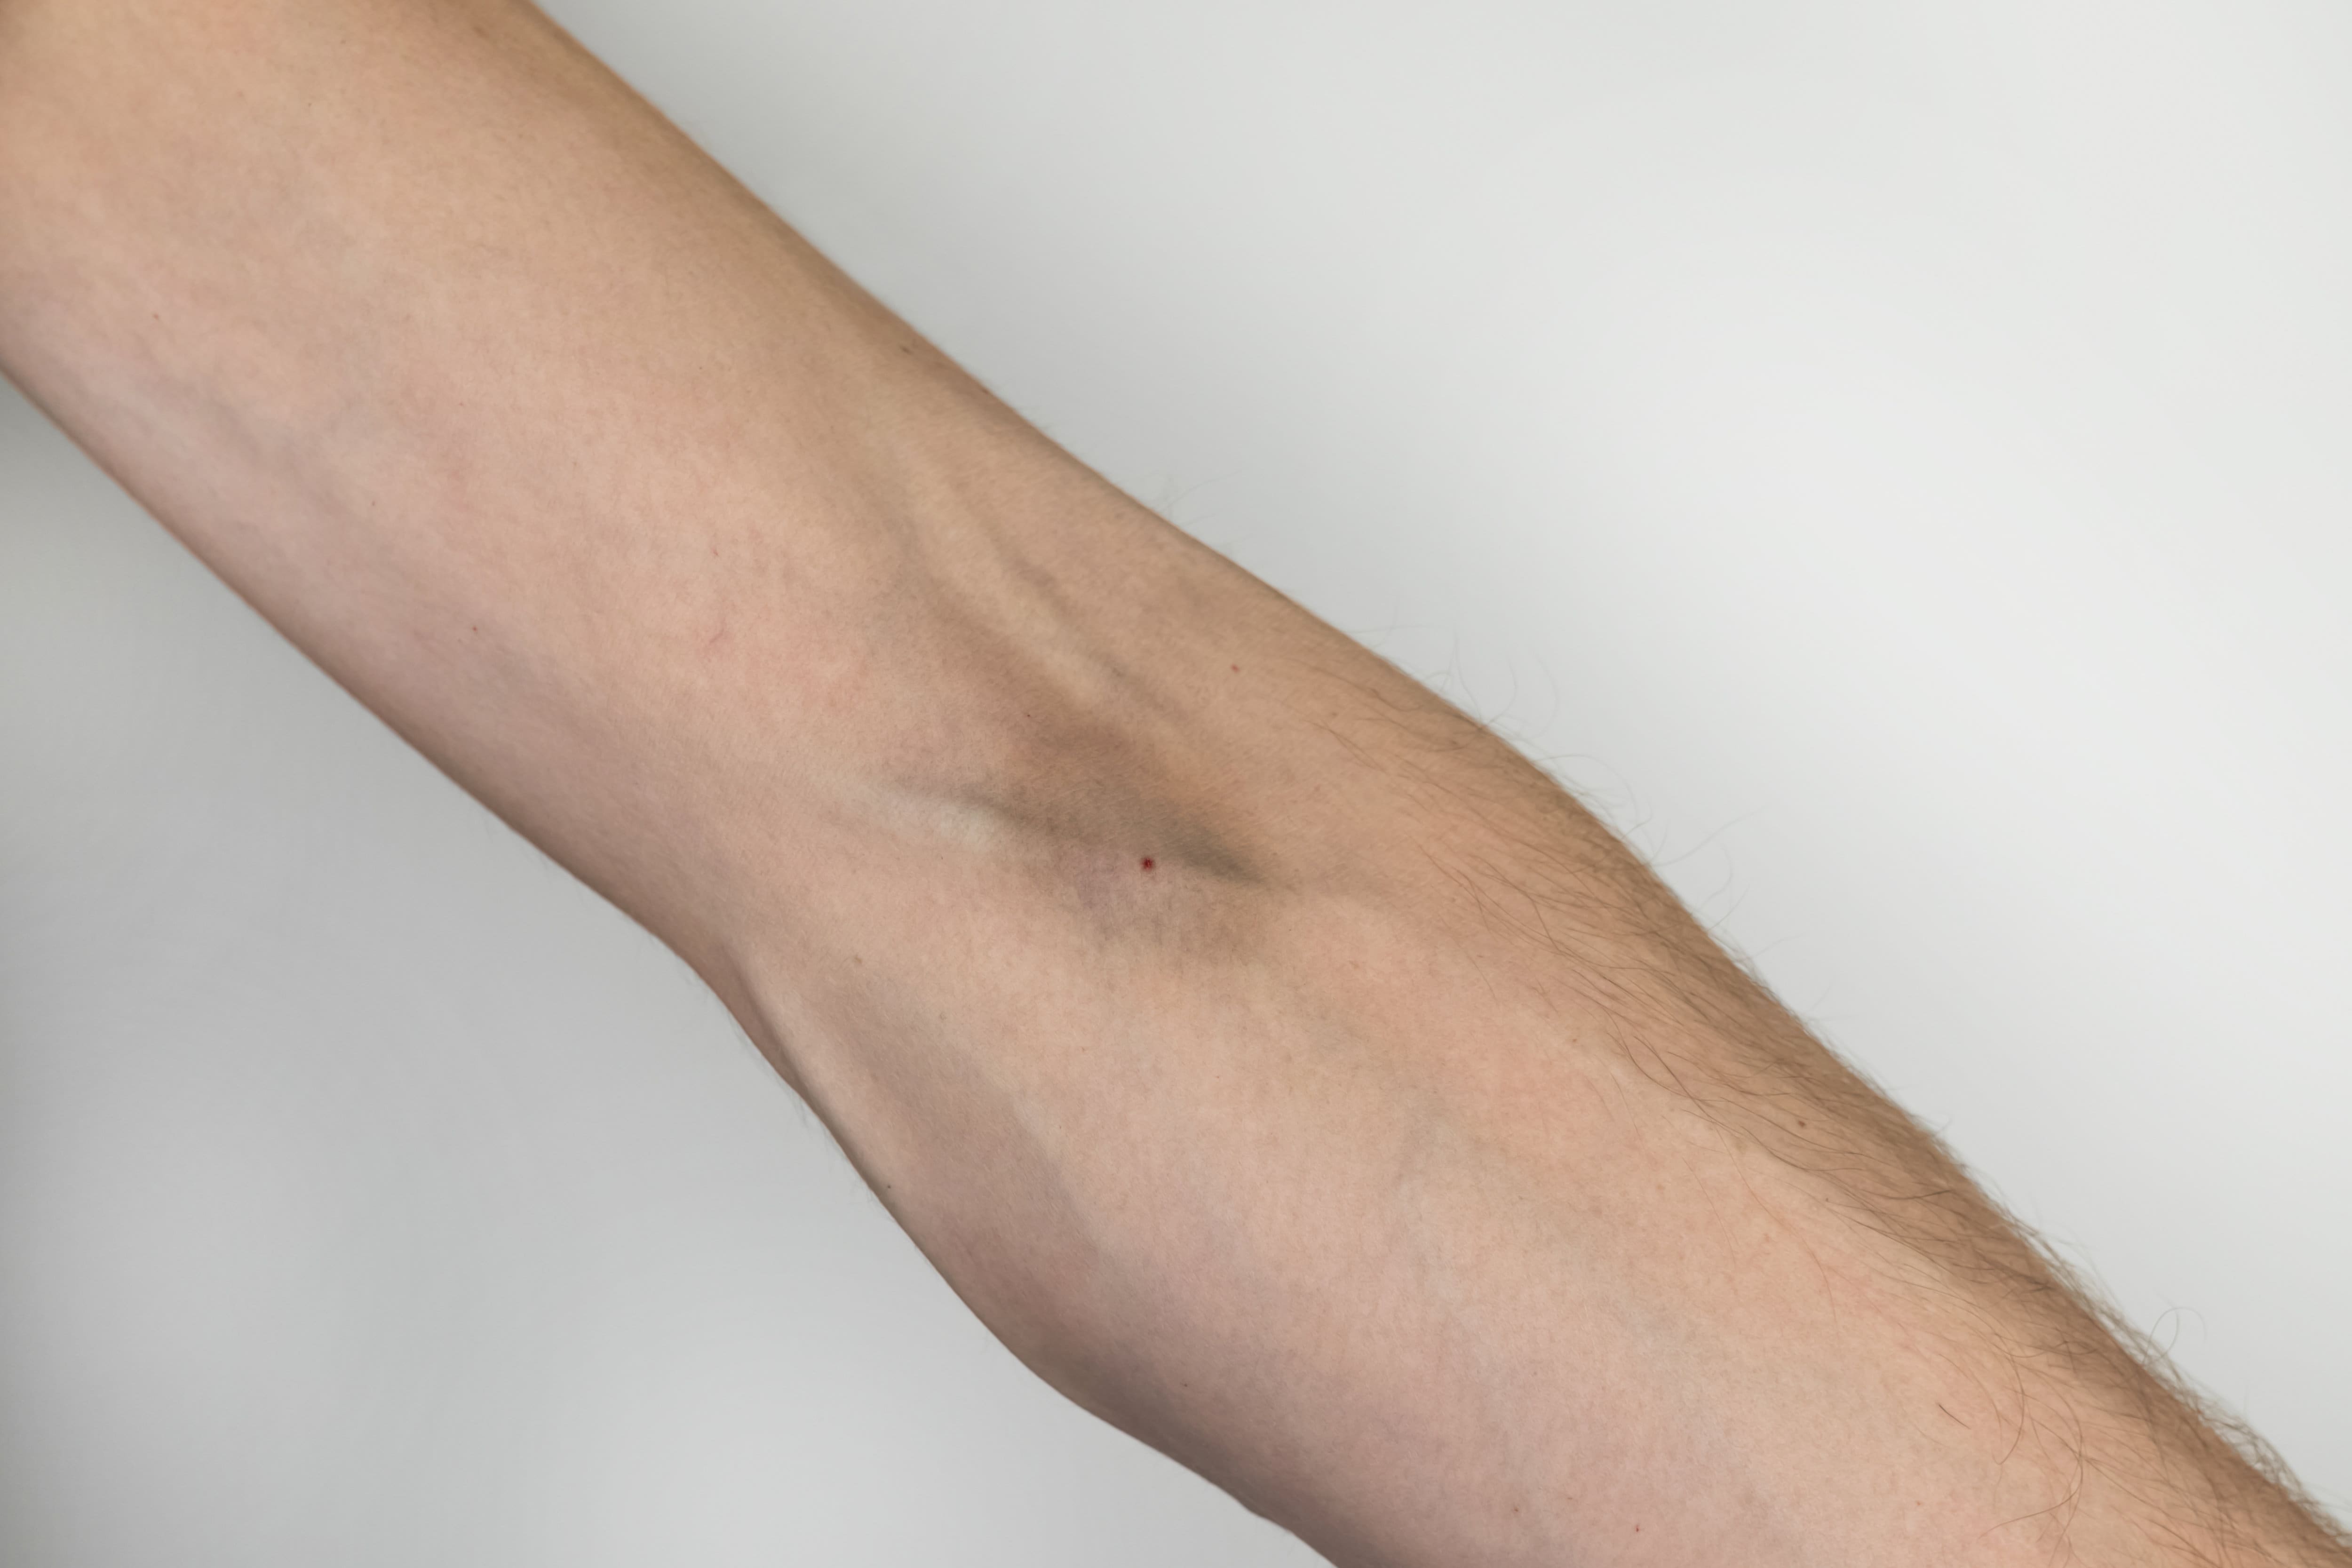 A close up of a man's arm with a bruise on it, possibly from an outpatient program or addiction recovery center.